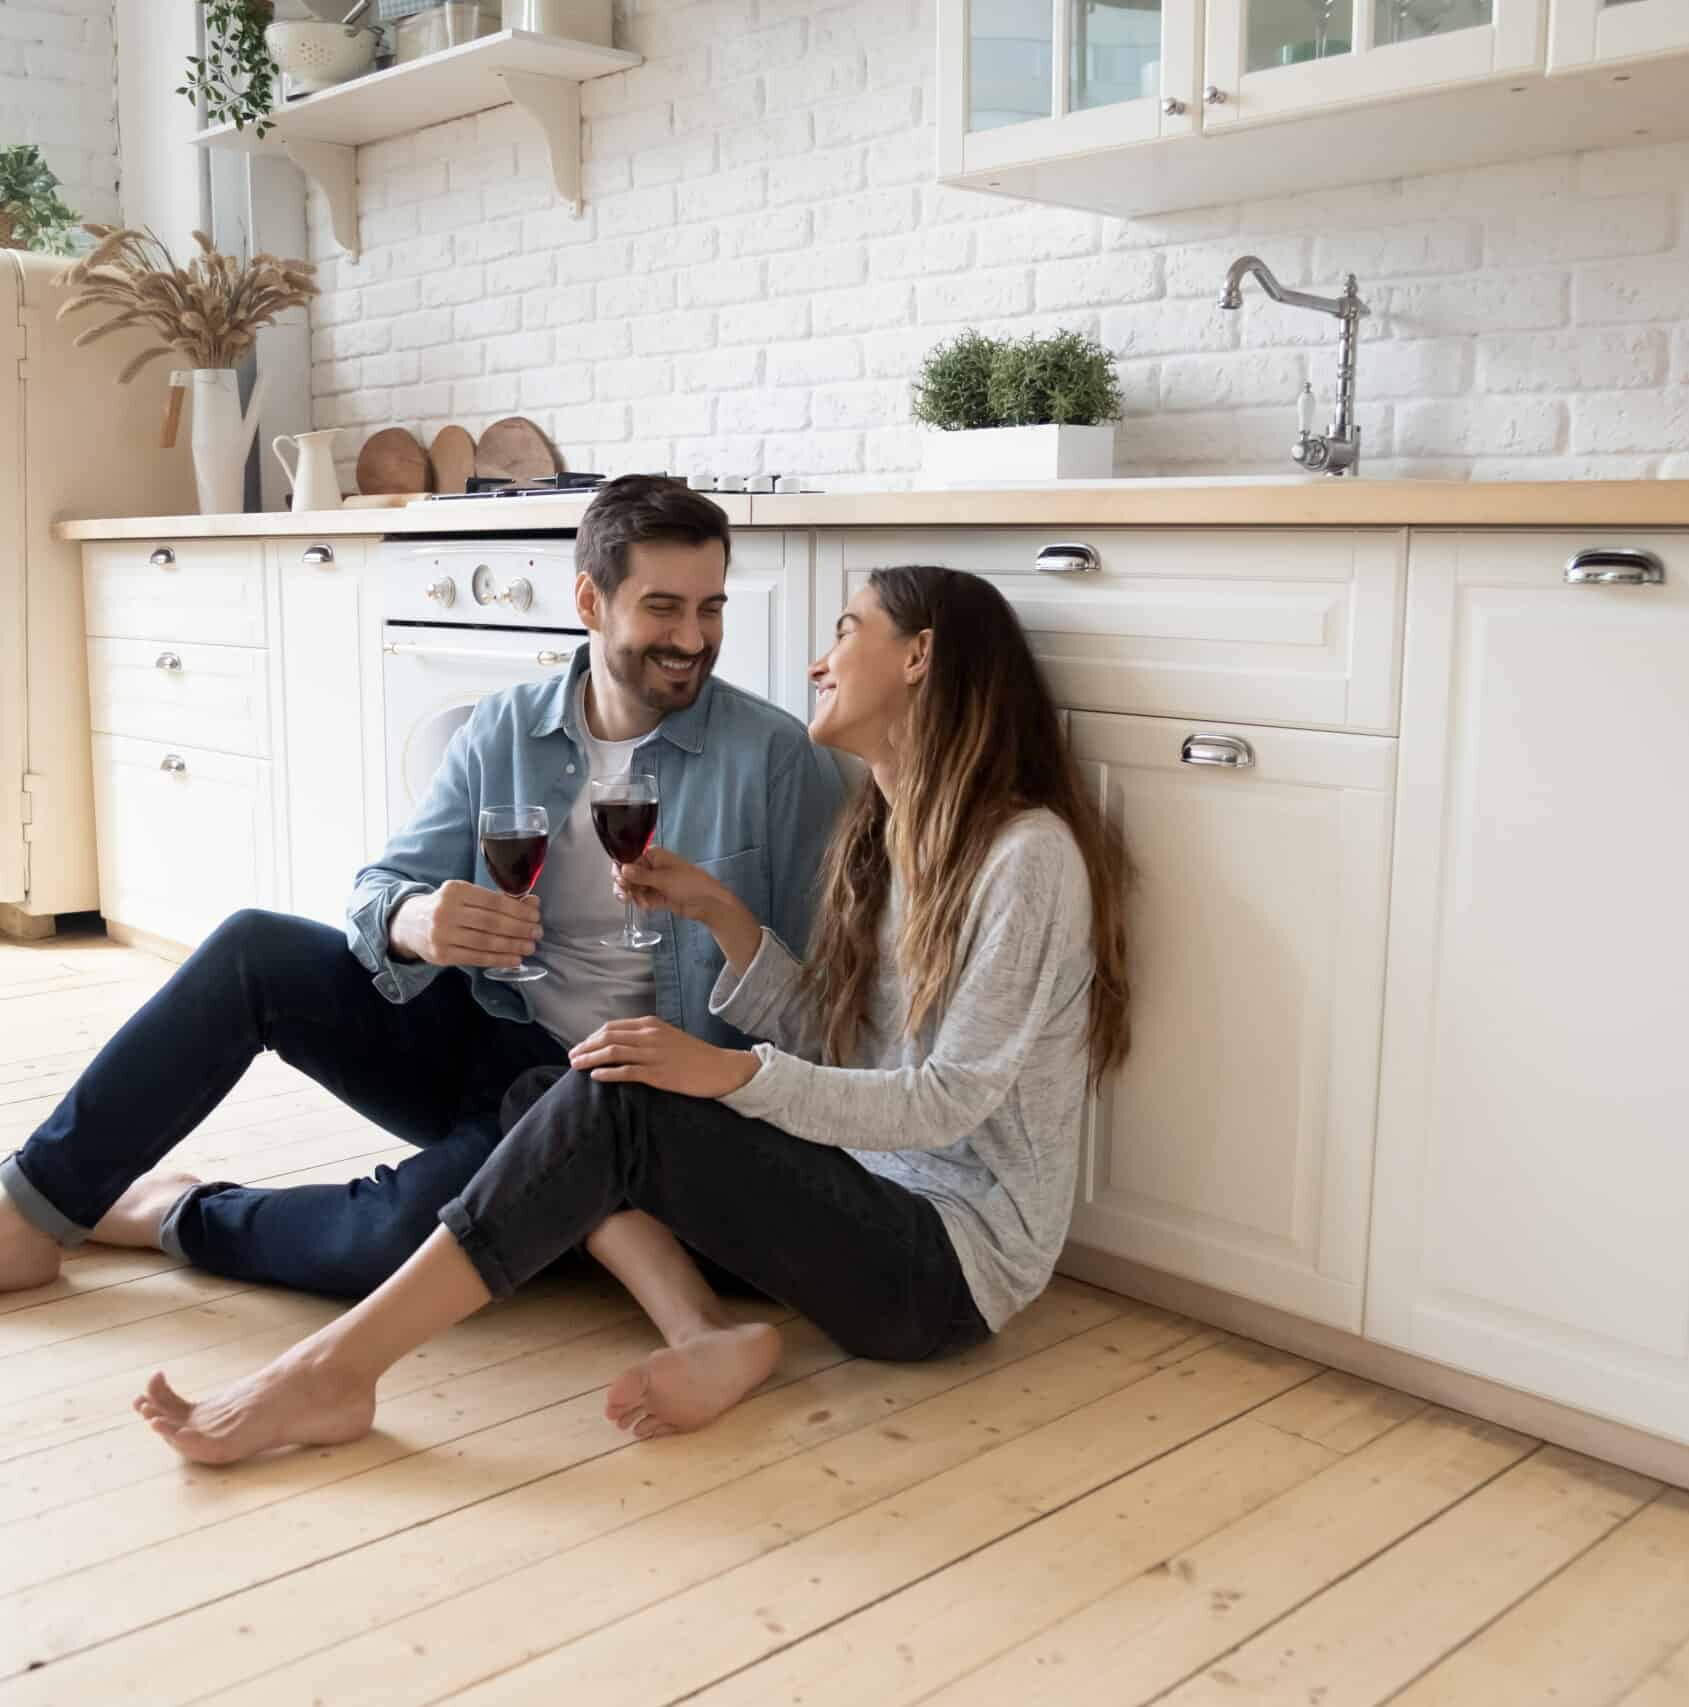 Romantic couple sit on warm kitchen floor talking drinking wine - behind them is a custom wooden counter top and custom white cabinetry